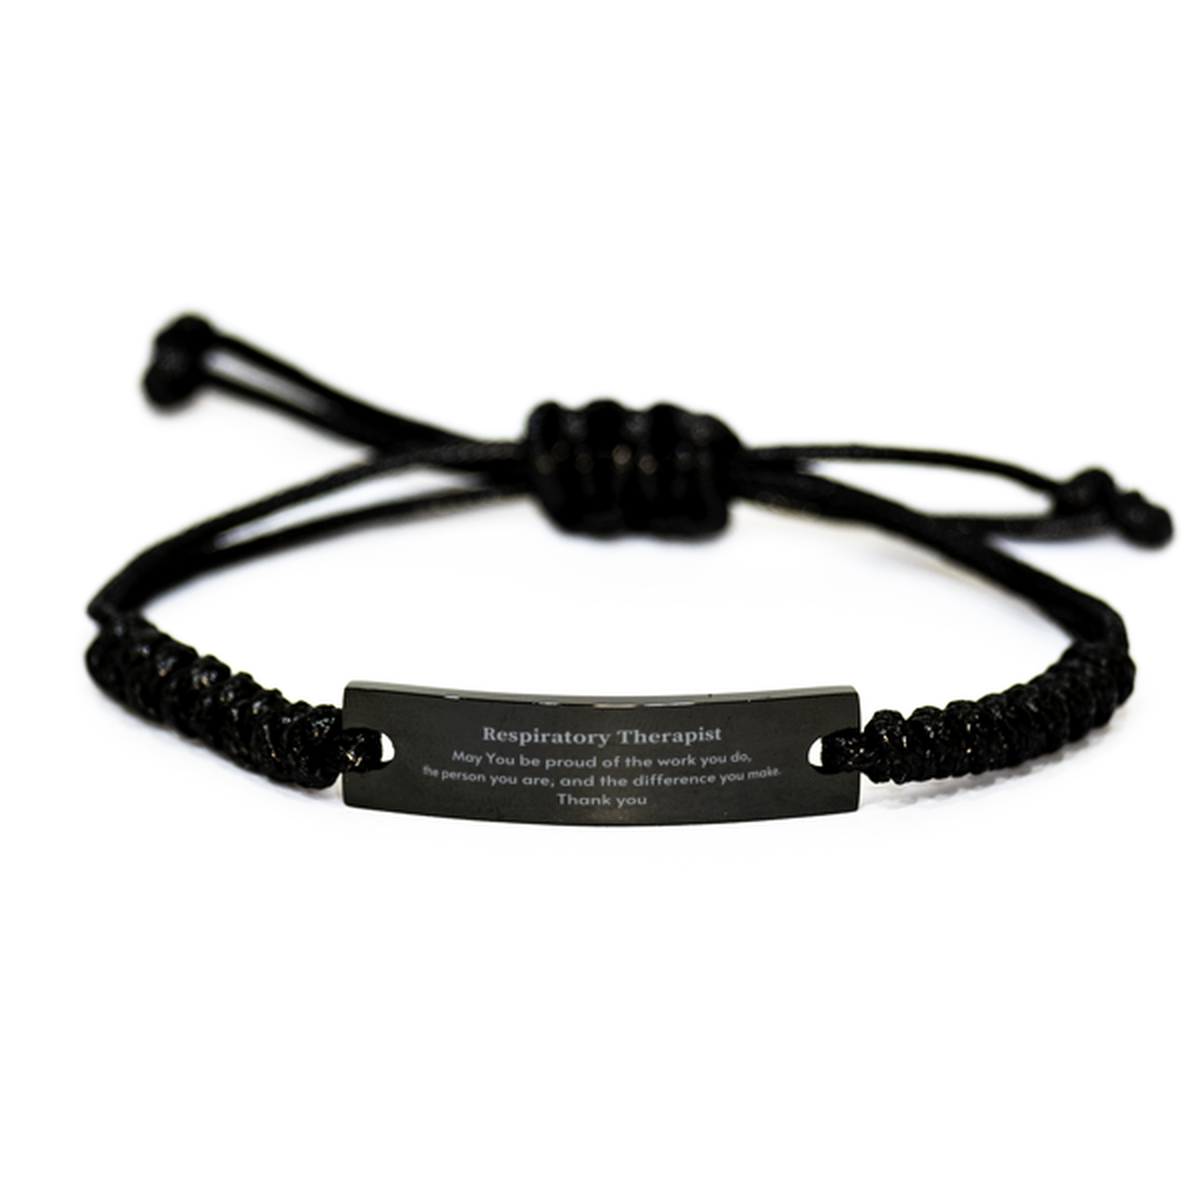 Heartwarming Black Rope Bracelet Retirement Coworkers Gifts for Respiratory Therapist, Respiratory Therapist May You be proud of the work you do, the person you are Gifts for Boss Men Women Friends